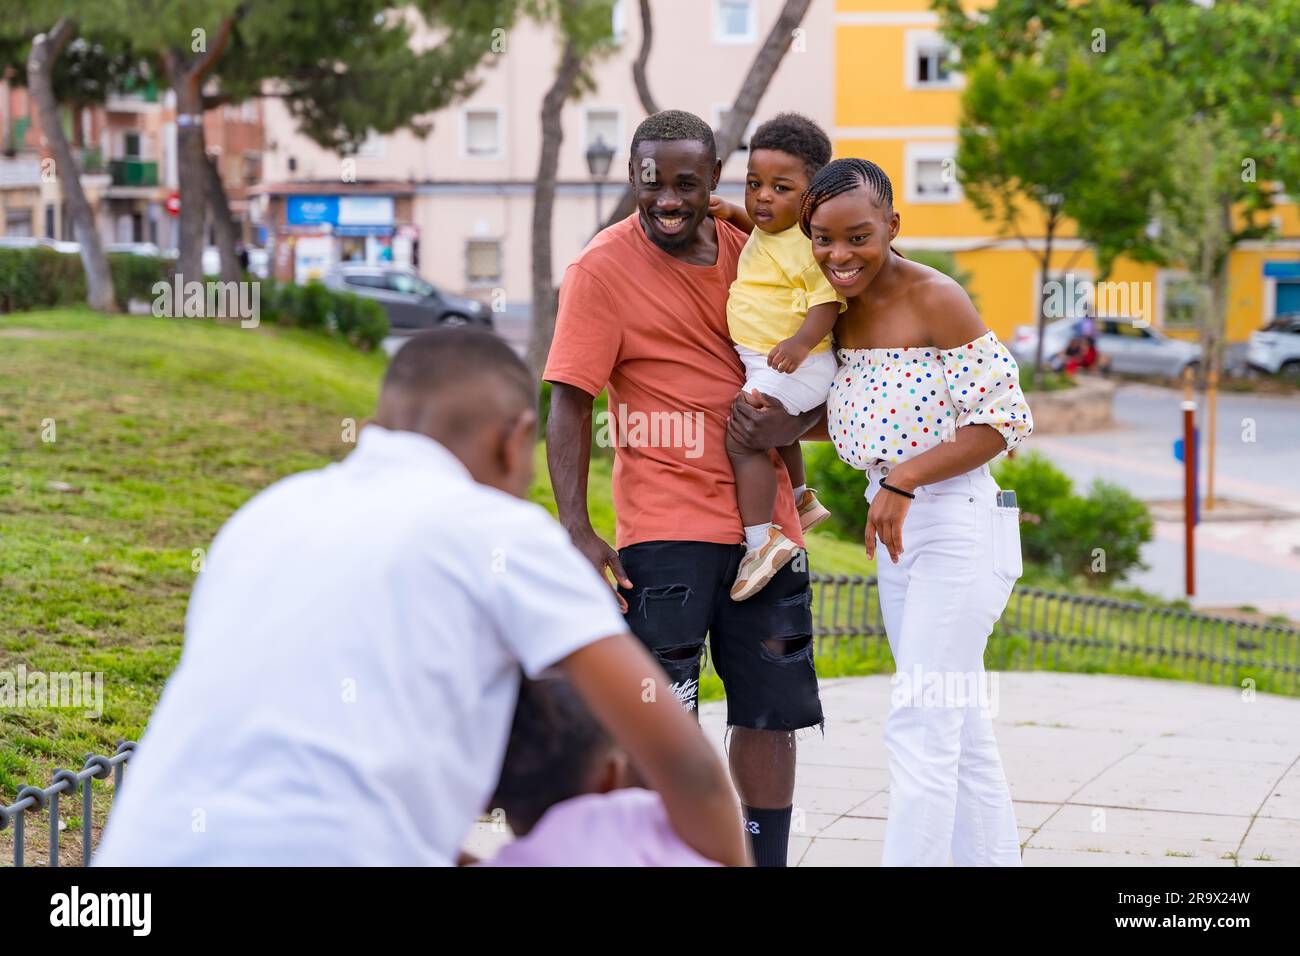 African black ethnicity family having fun with happy children together in city park Stock Photo